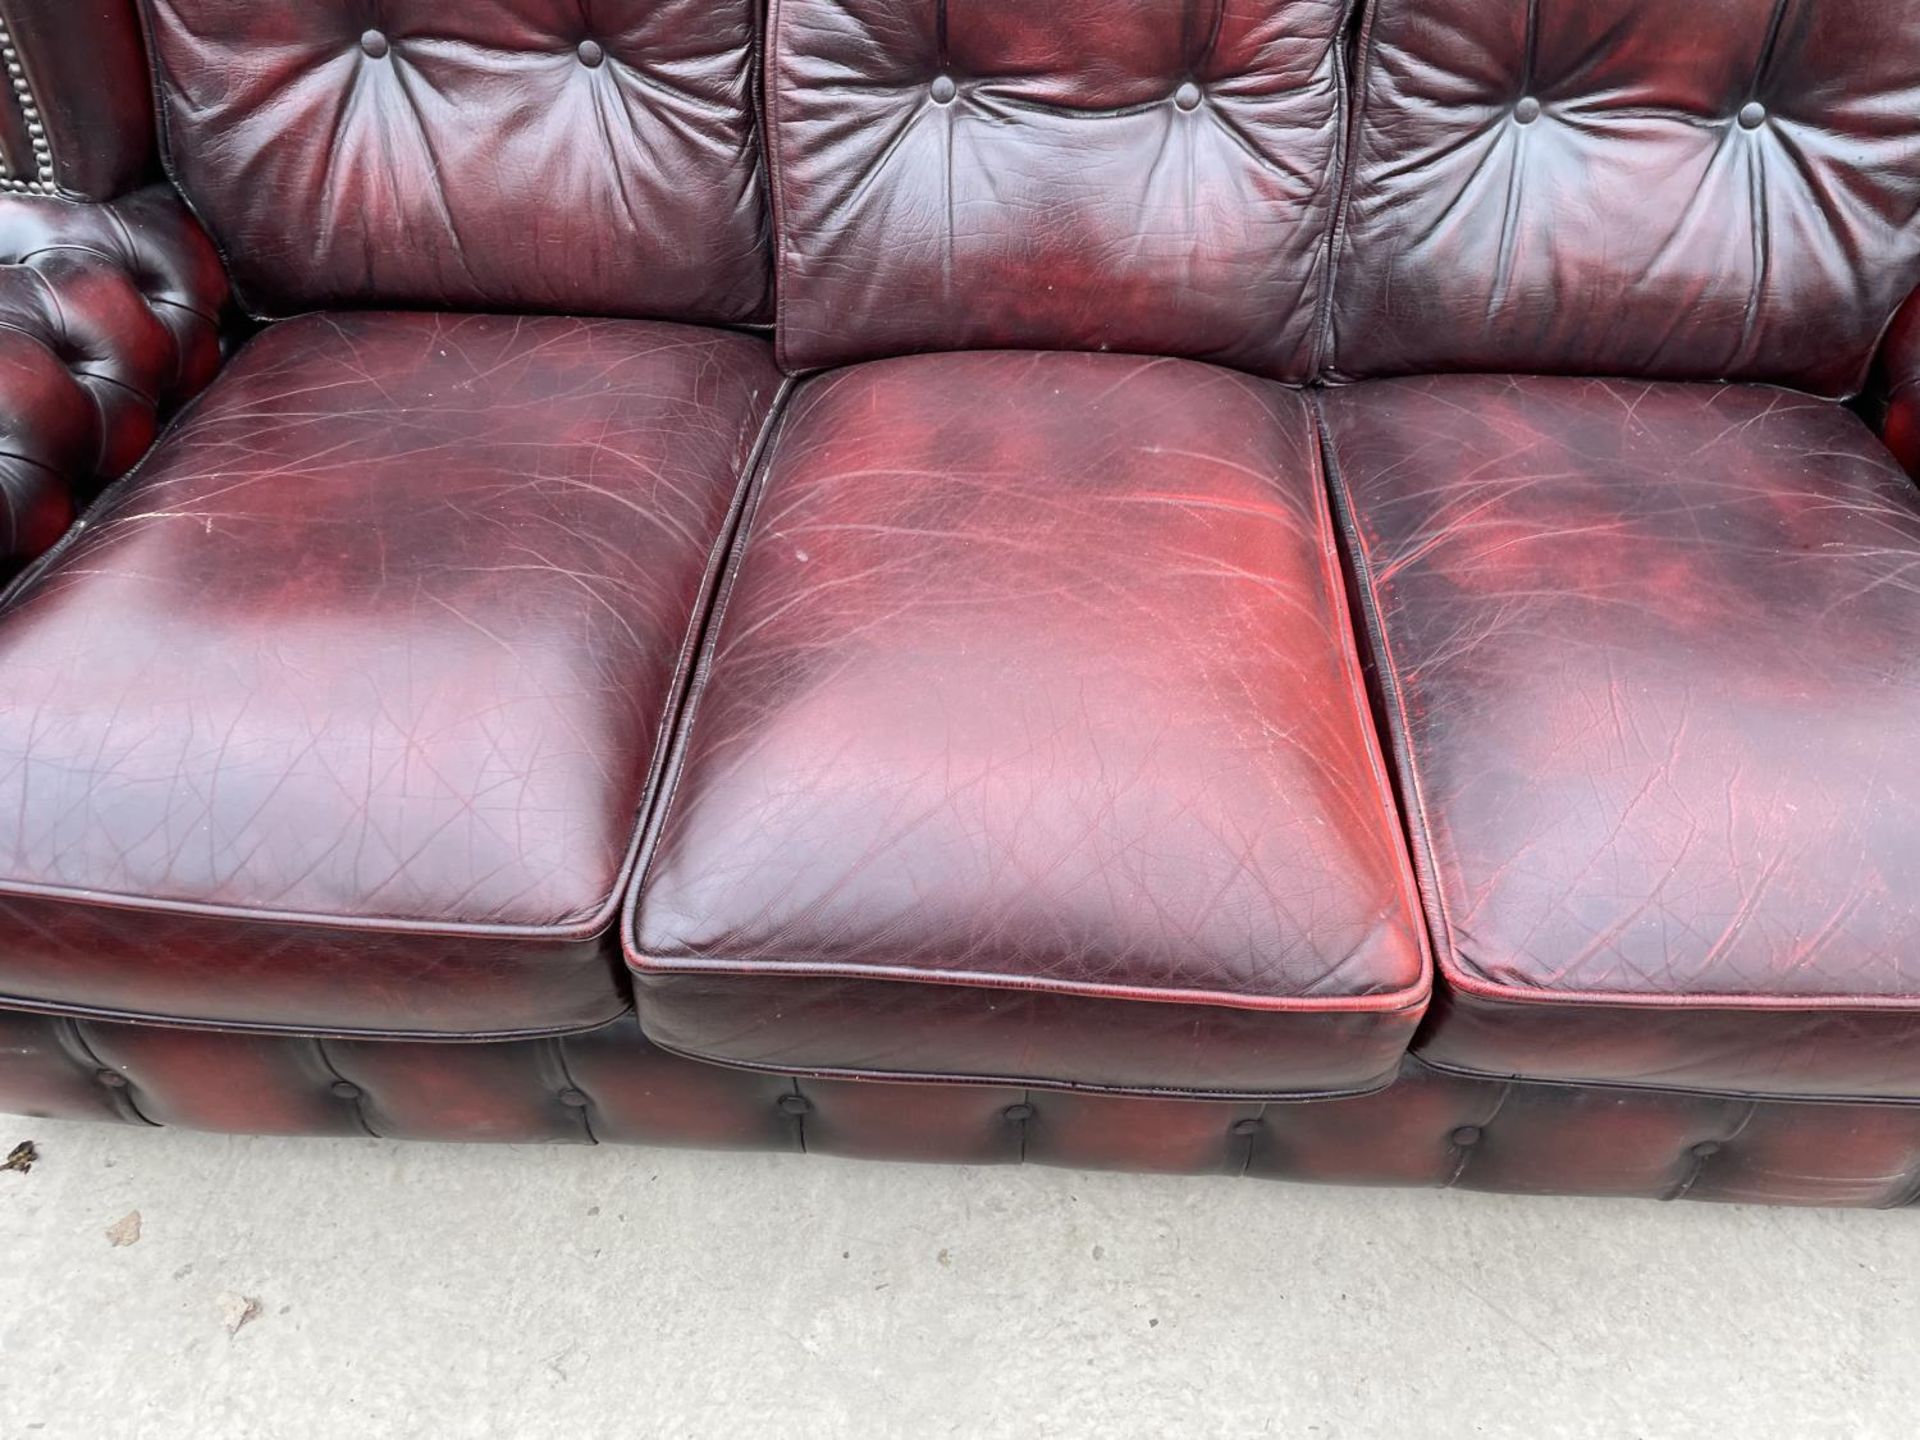 AN OXBLOOD LEATHER THREE SEATER SOFA WITH BUTTONED BACK AND ARMS - Image 4 of 6